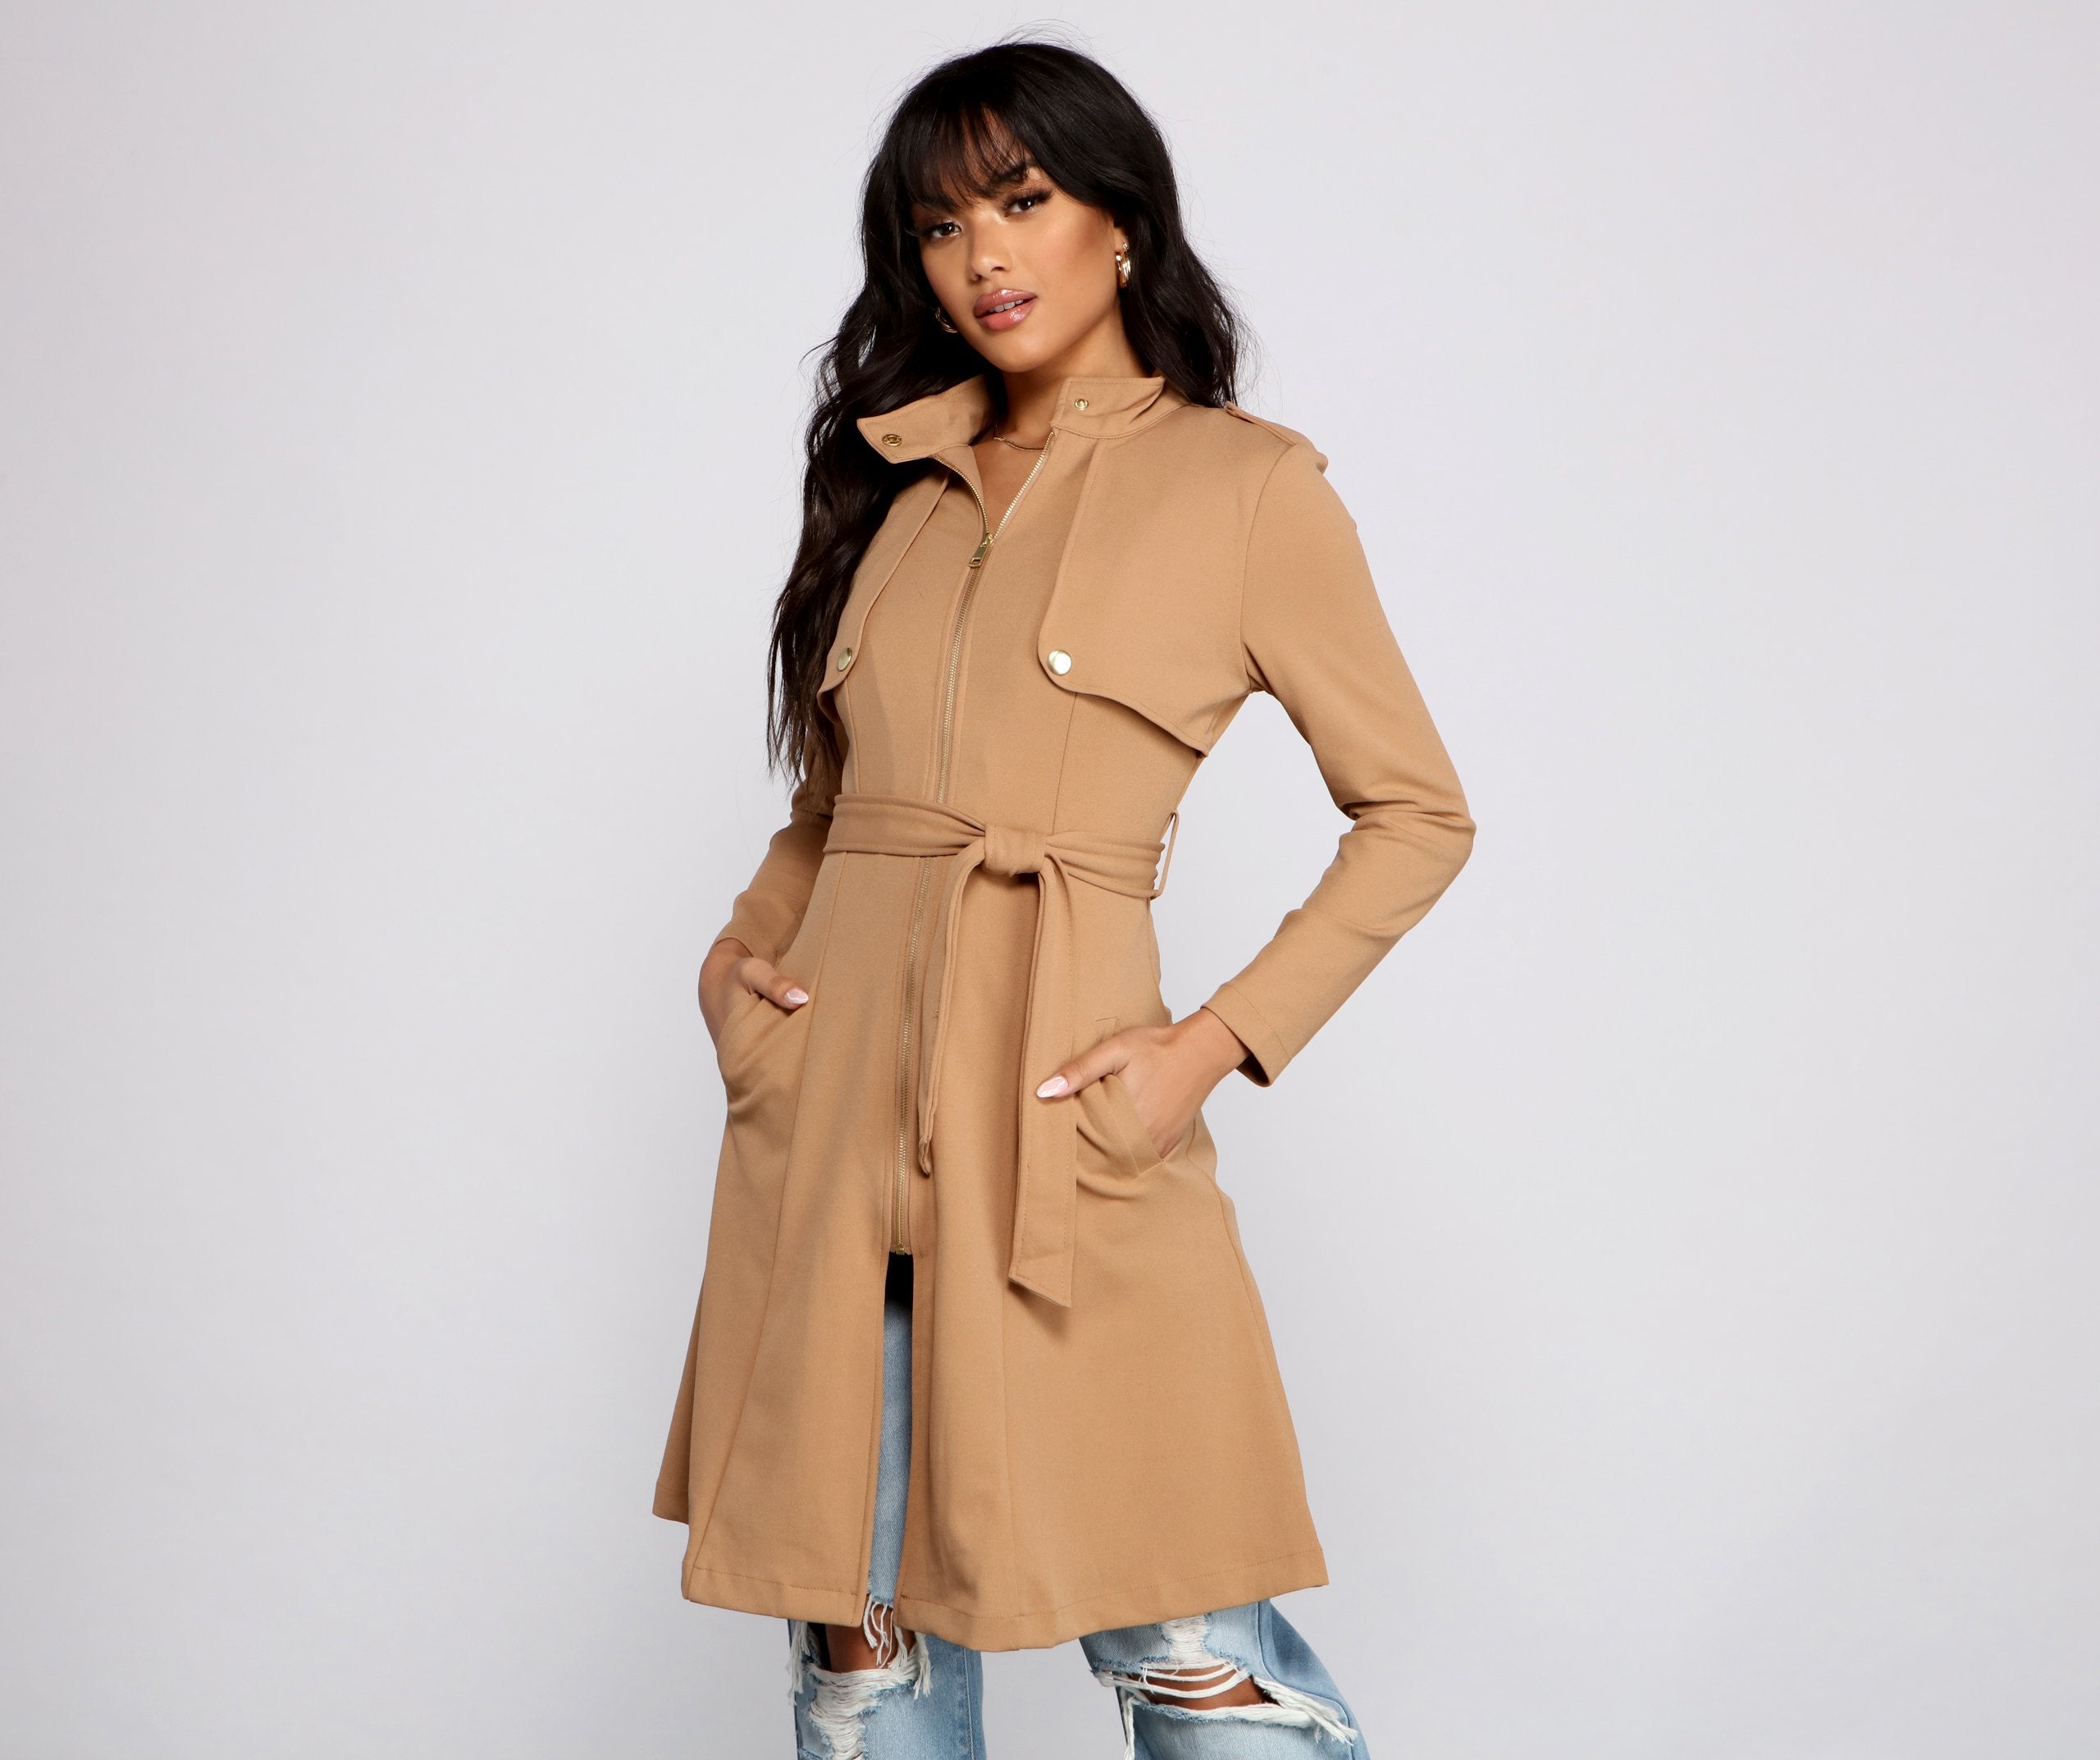 Belted Sophistication Crepe Trench Dress - Lady Occasions